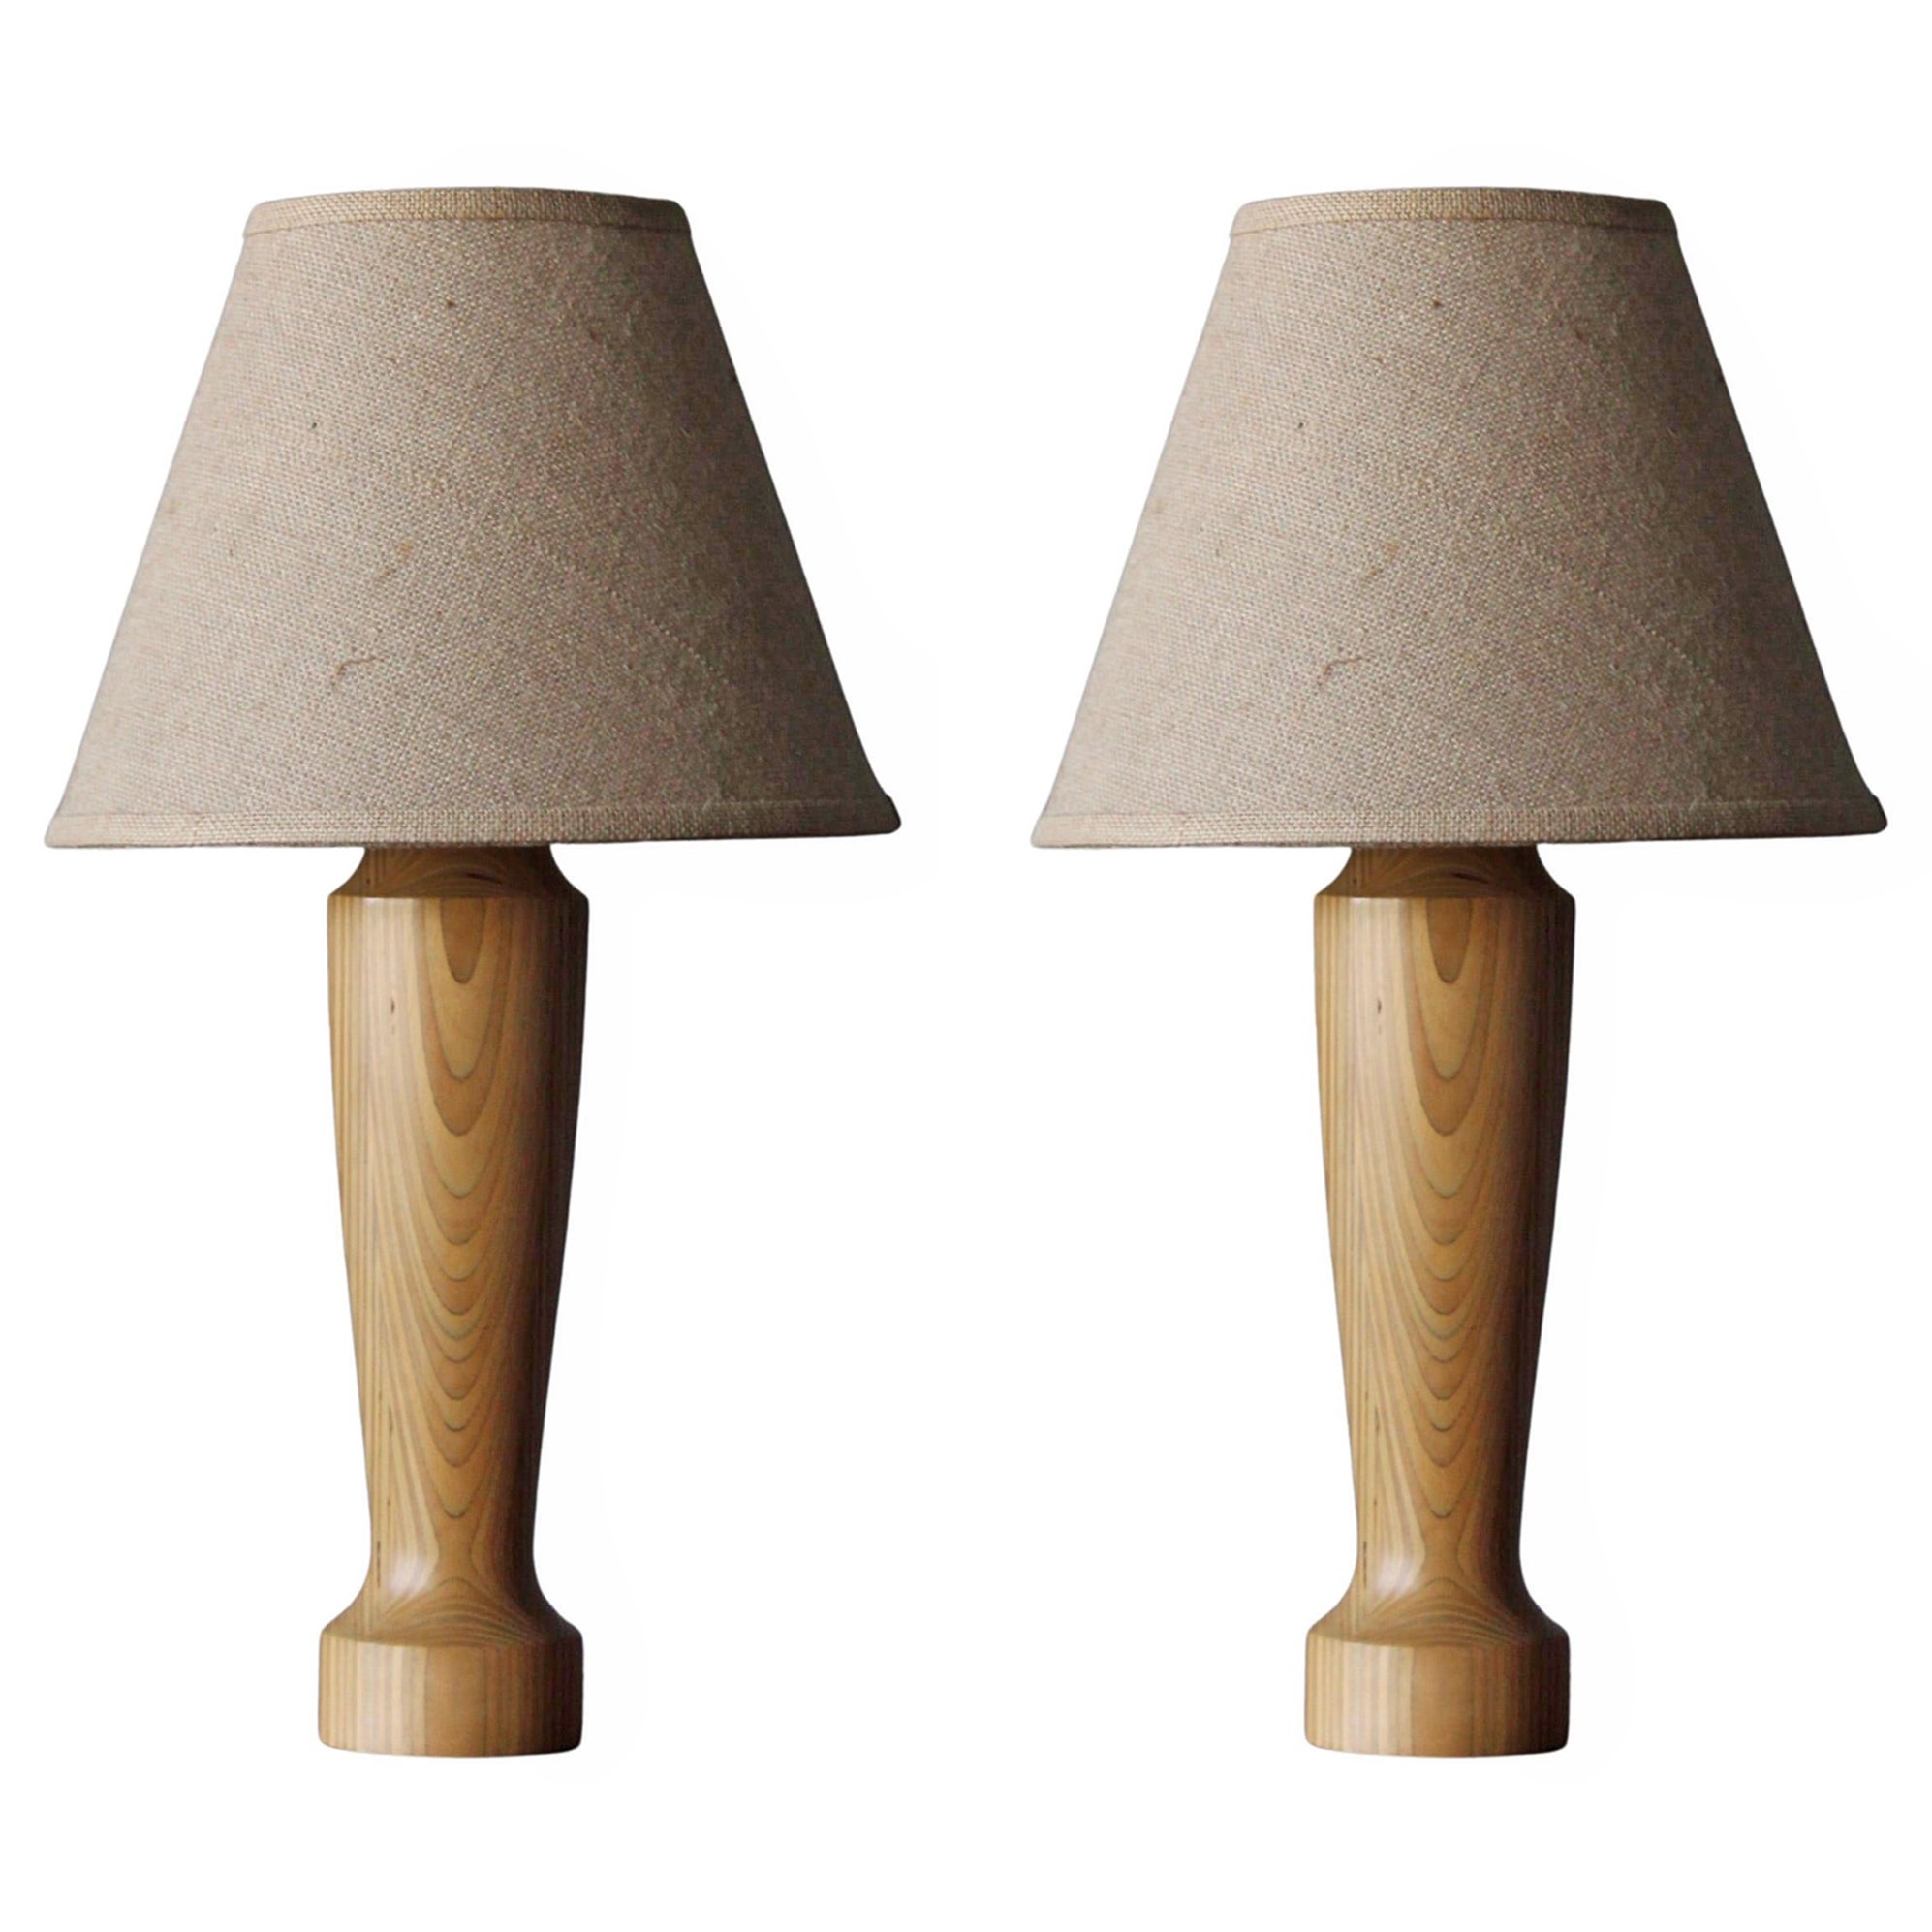 Swedish, Modernist Table Lamps, Laminated Turned Wood, Fabric, Sweden, 1960s